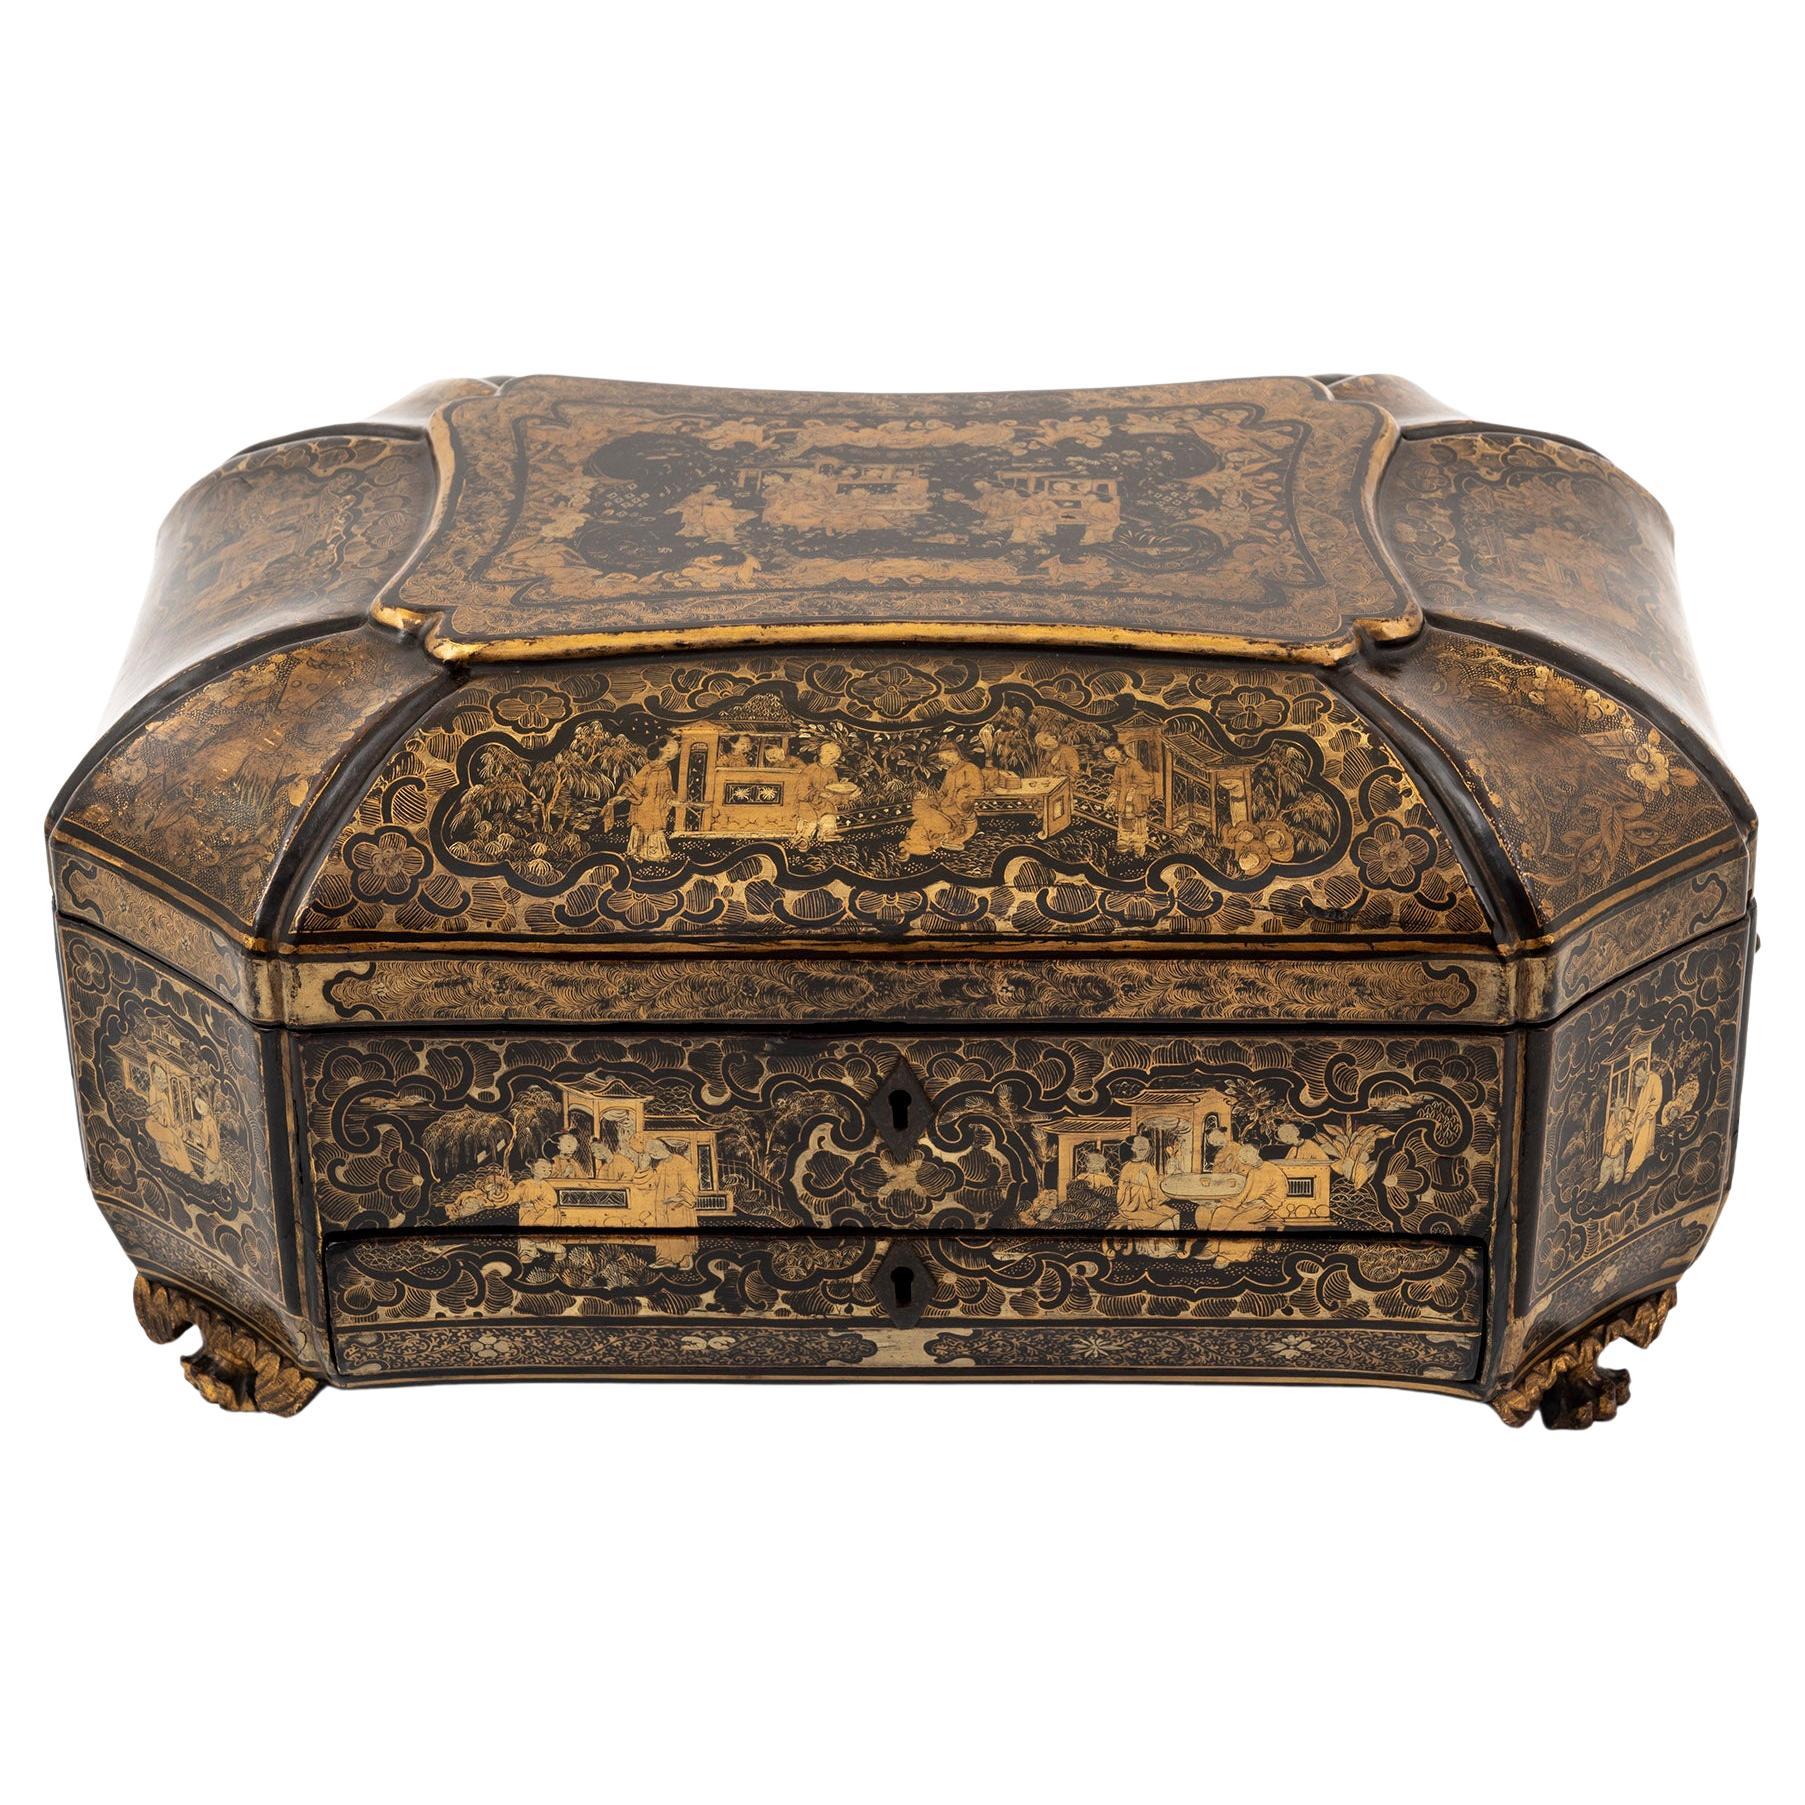 19th Century Antique Chinese Sewing Box